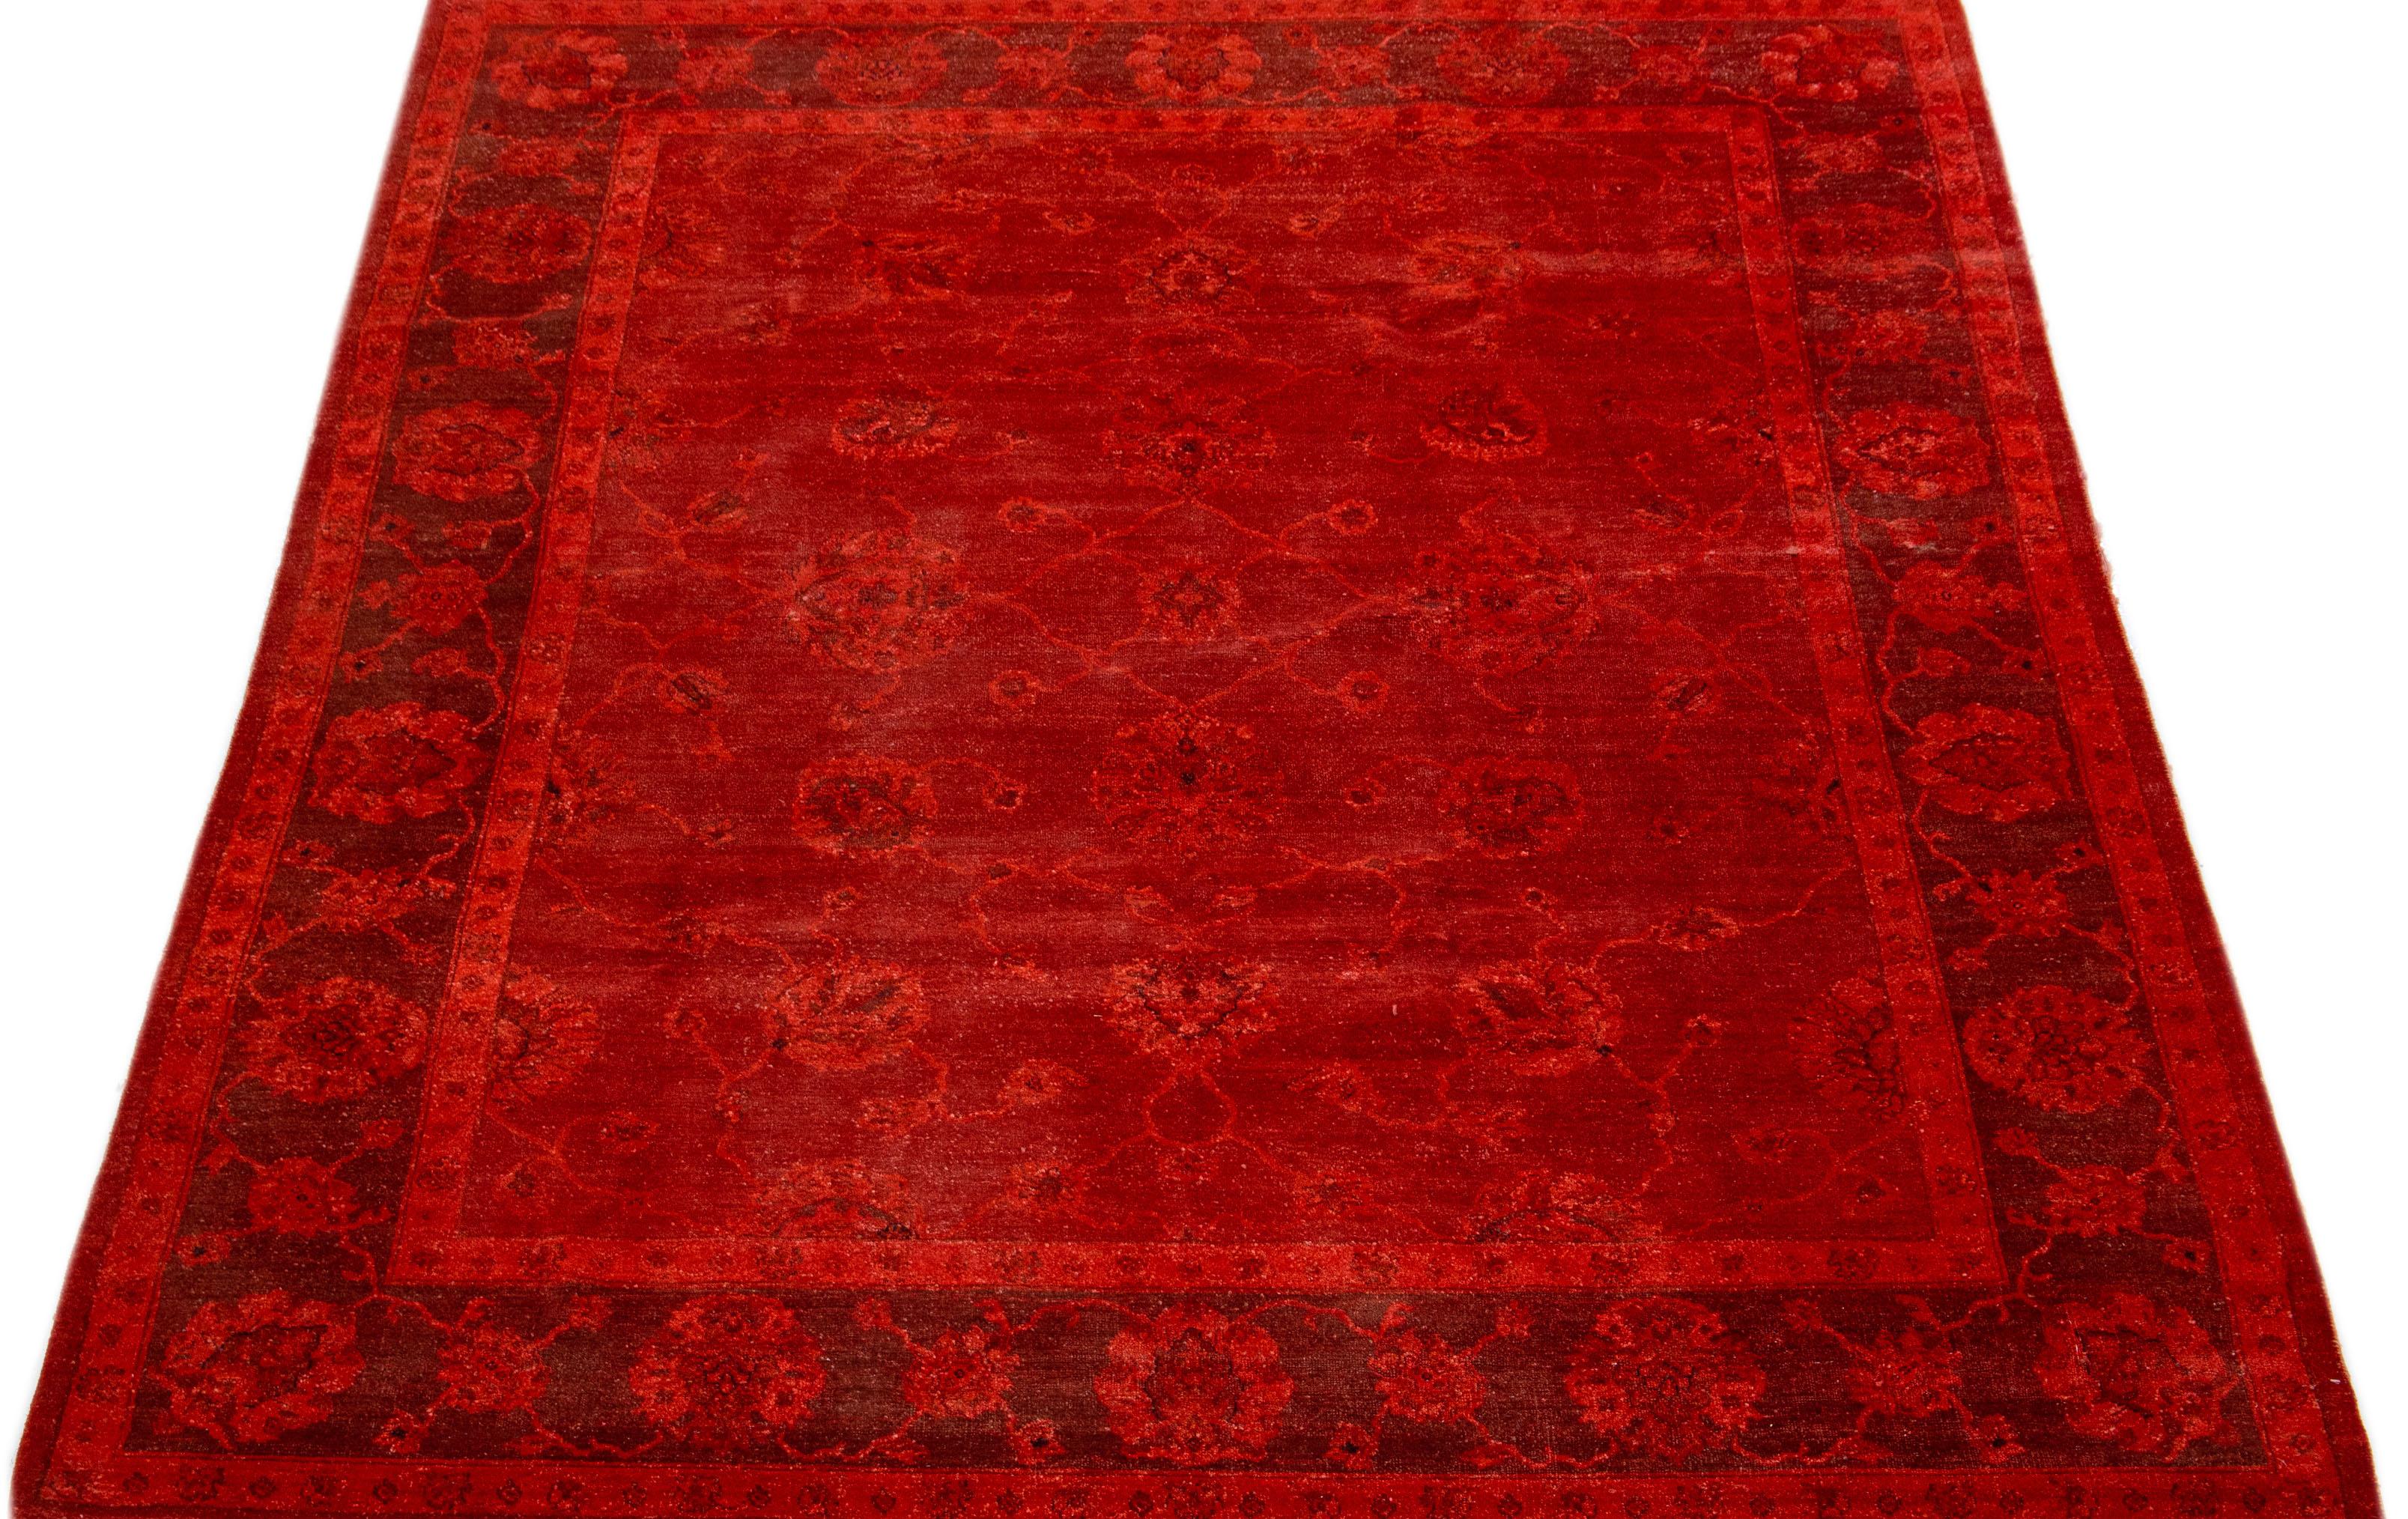 Presented in the overdye Art & Crafts style, this wool rug exhibits timeless elegance with a tasteful blend of delicate floral patterns and a vivid red background.

This rug measures 7'10